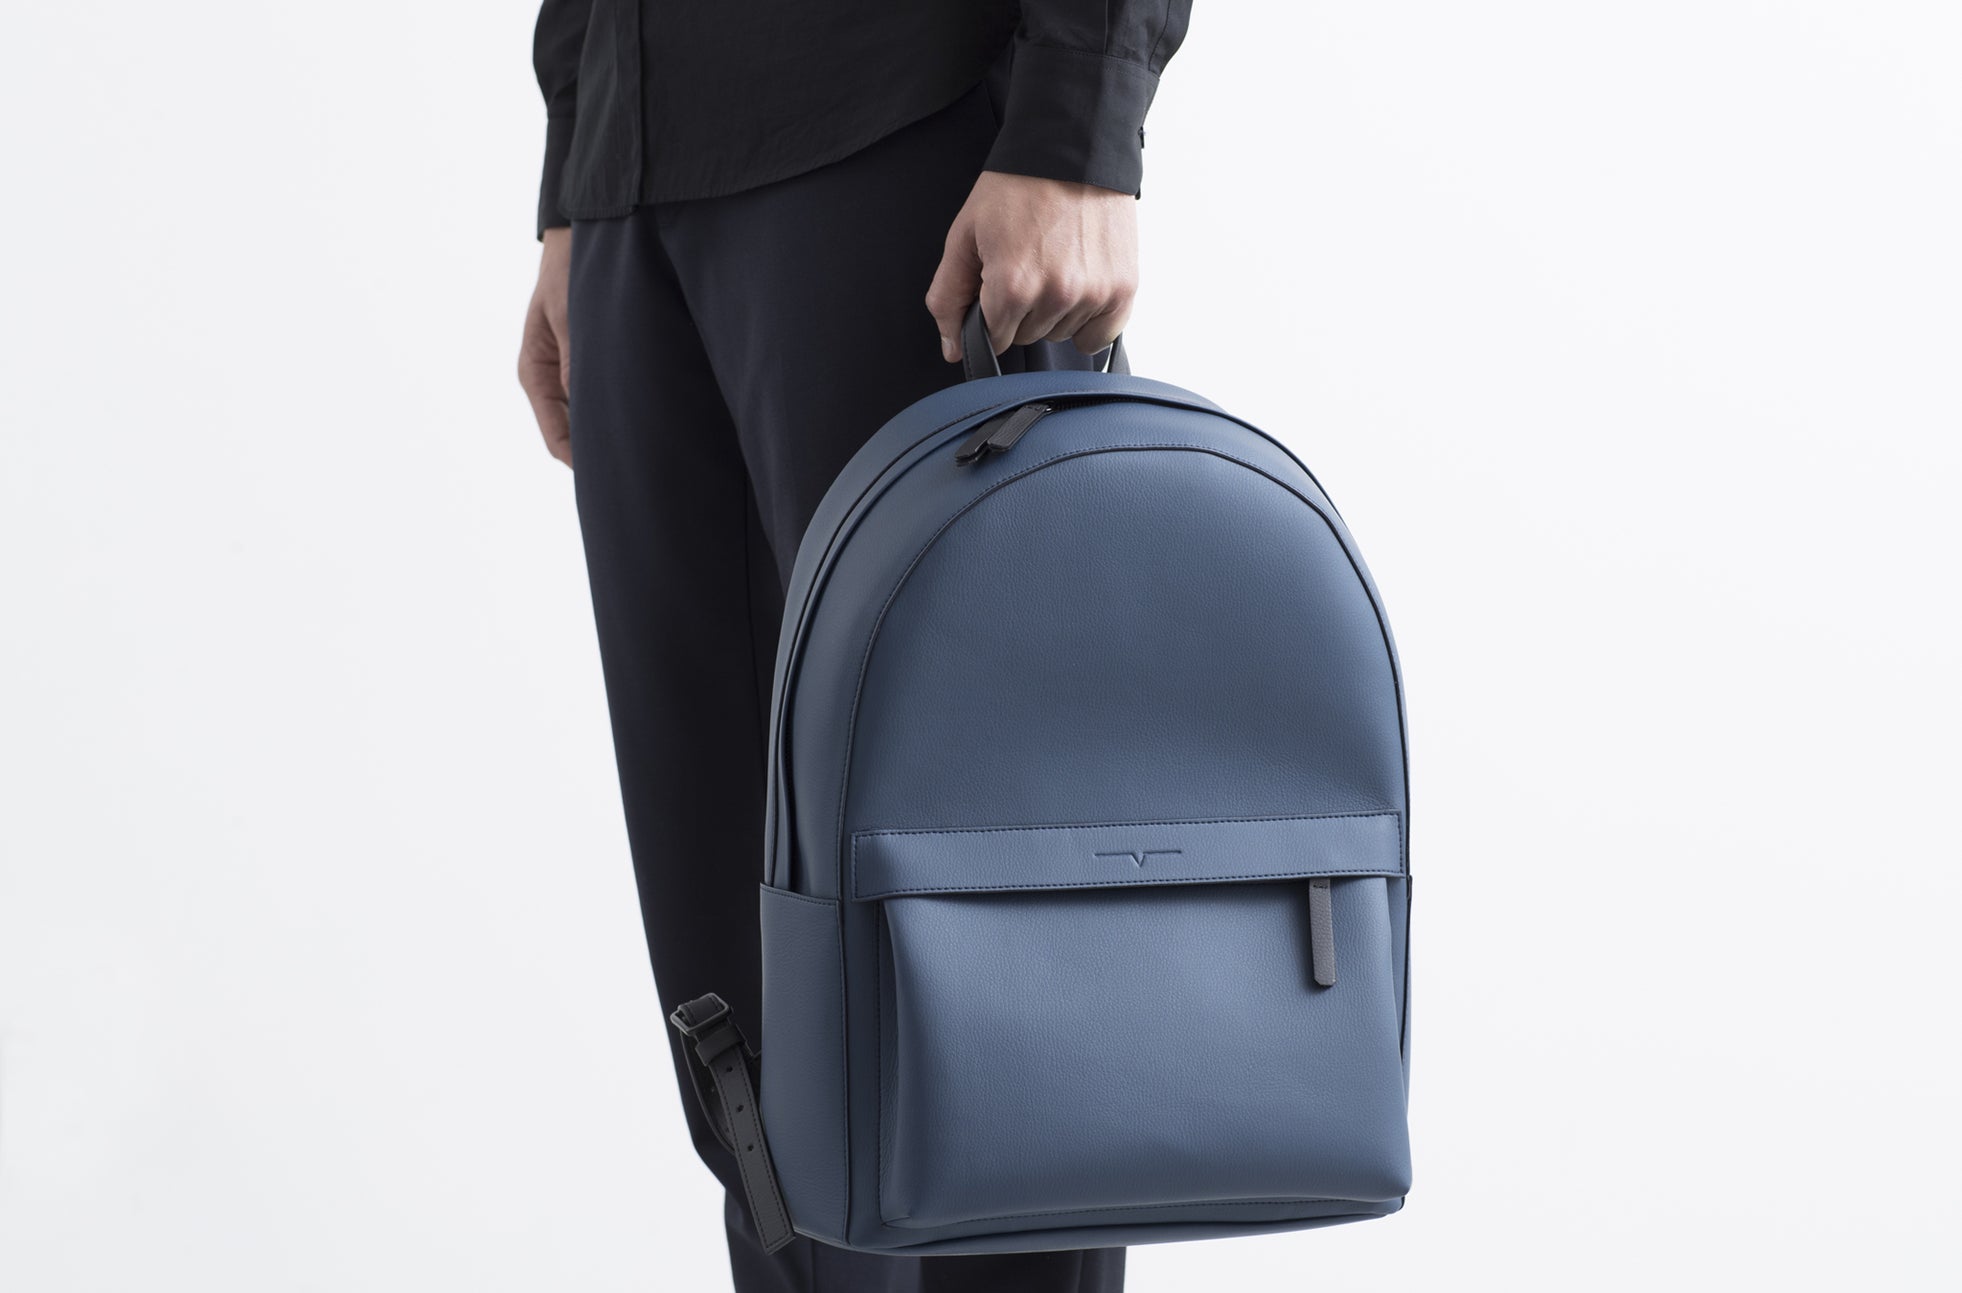 The Classic Backpack in Technik-Leather in Denim and Black image 10